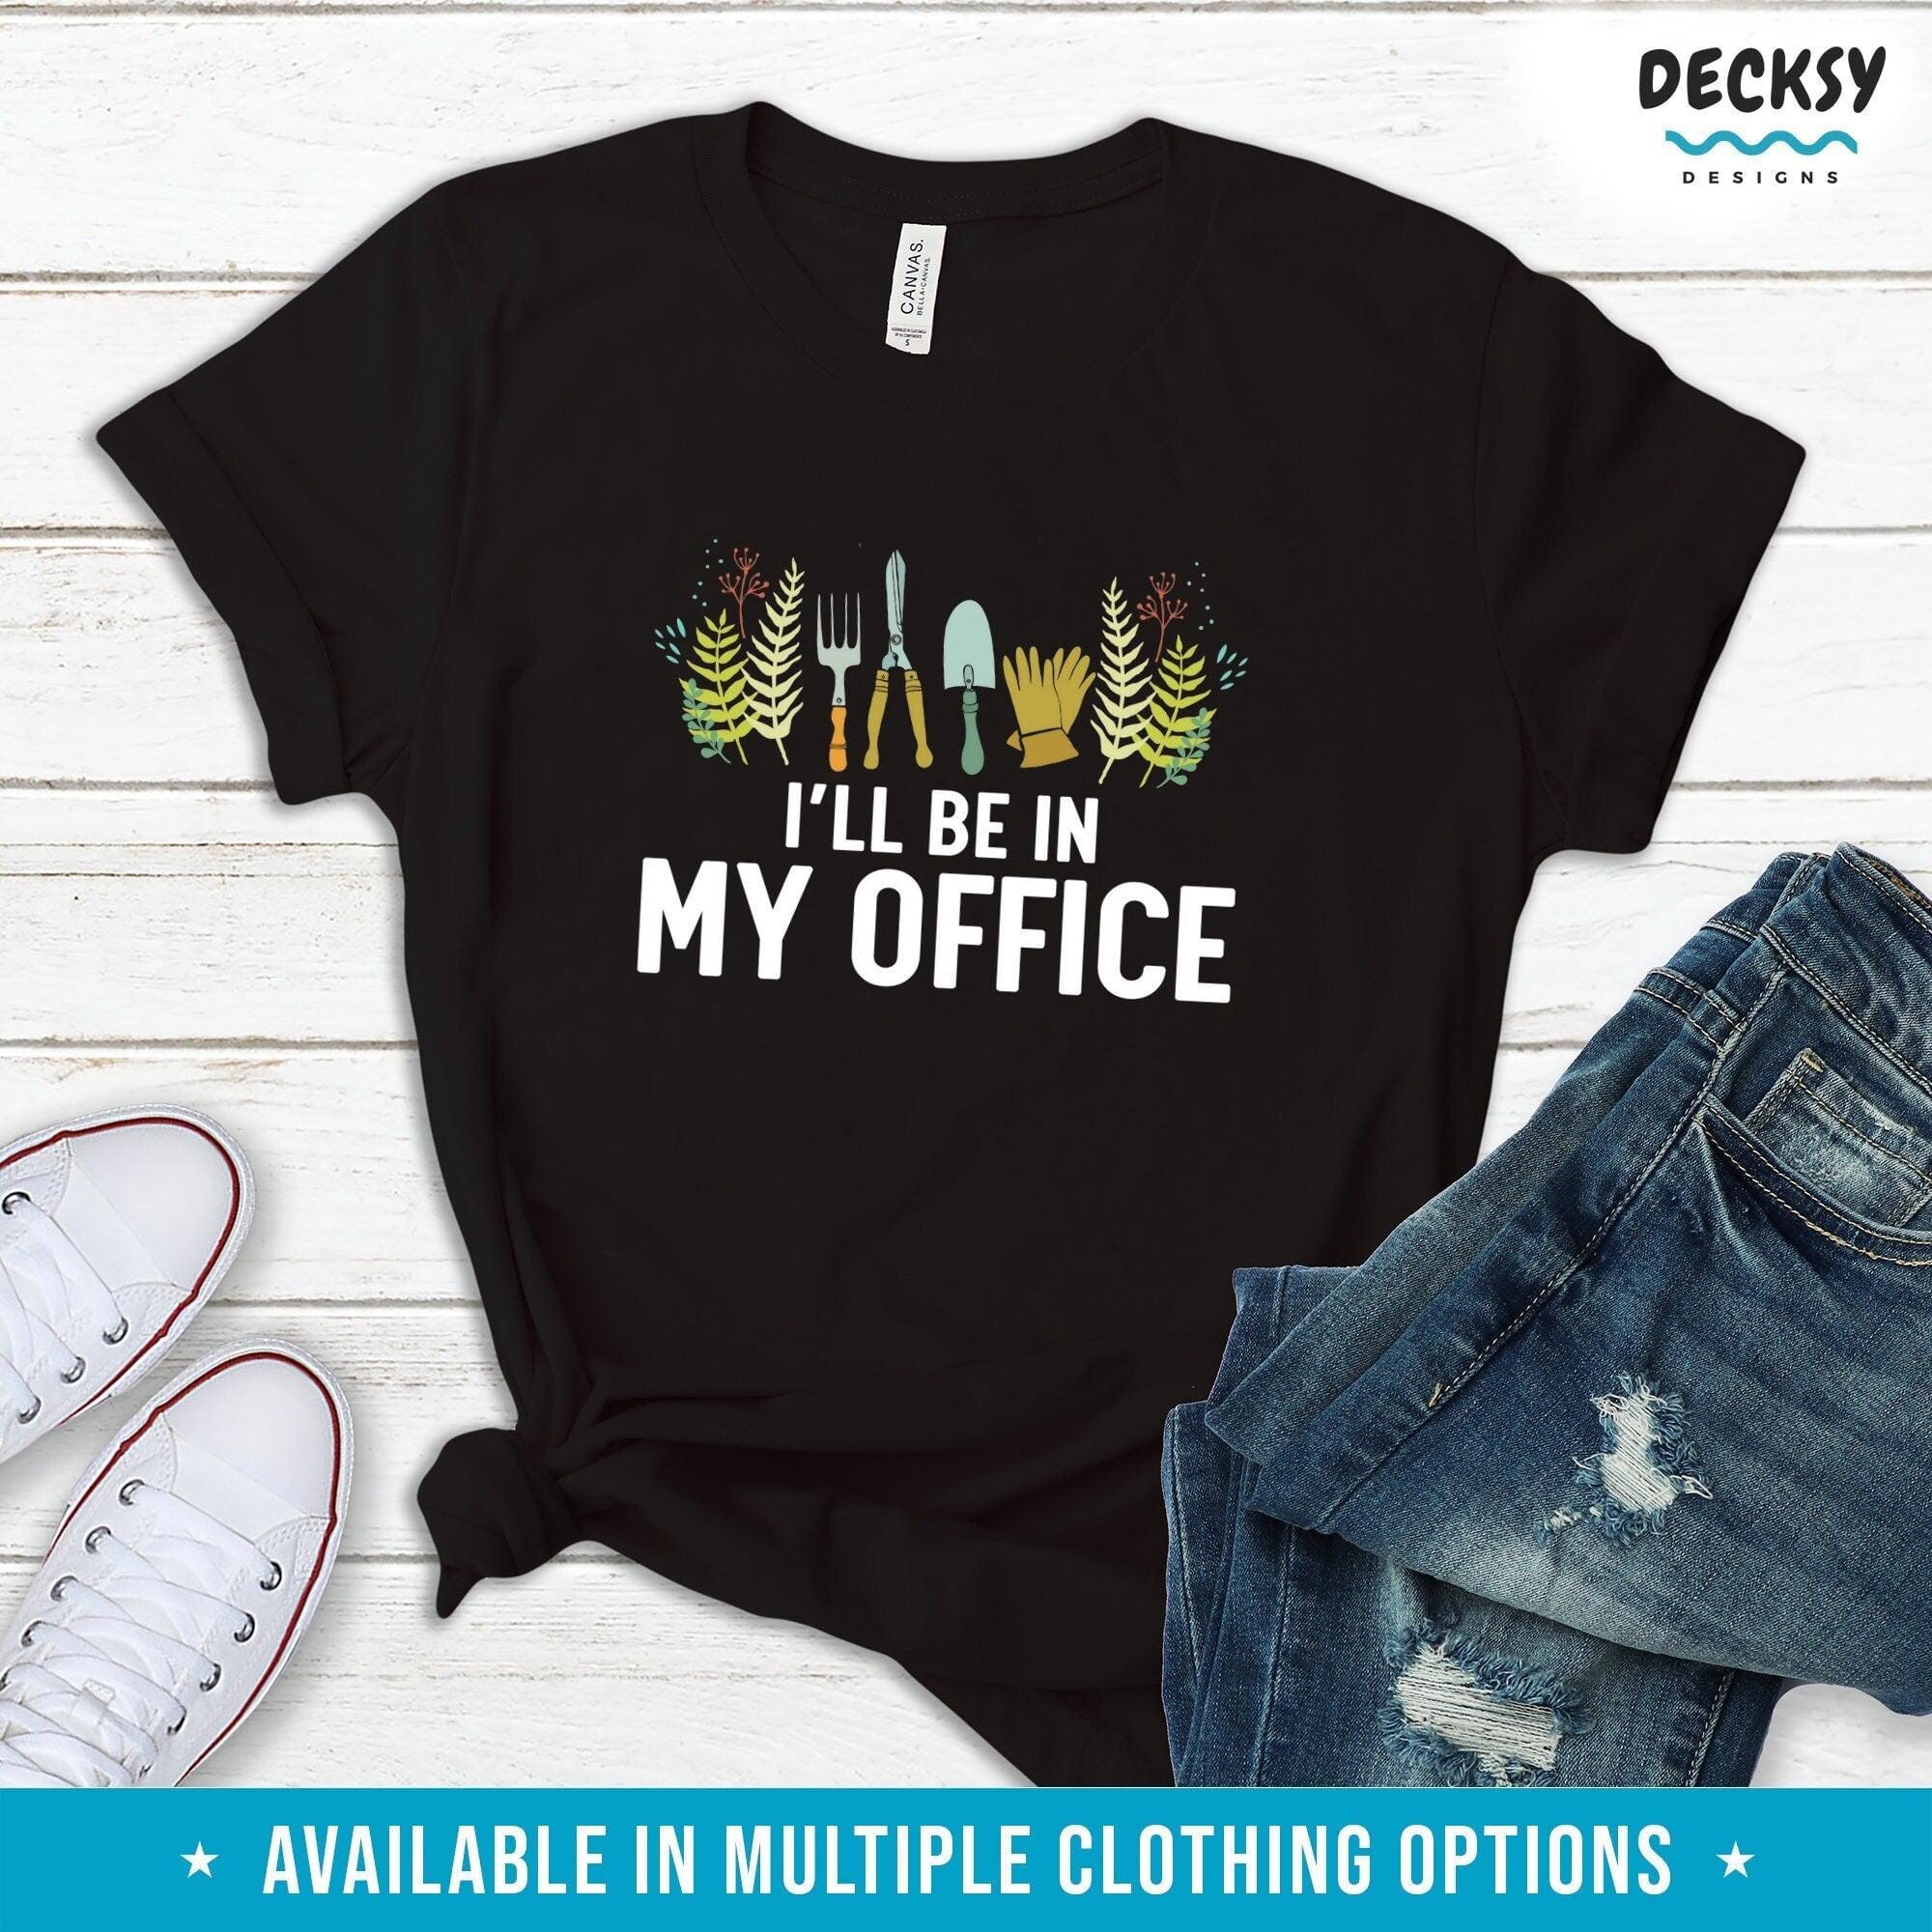 Gardening T Shirt, Plant Owner Gift-Clothing:Gender-Neutral Adult Clothing:Tops & Tees:T-shirts:Graphic Tees-DecksyDesigns